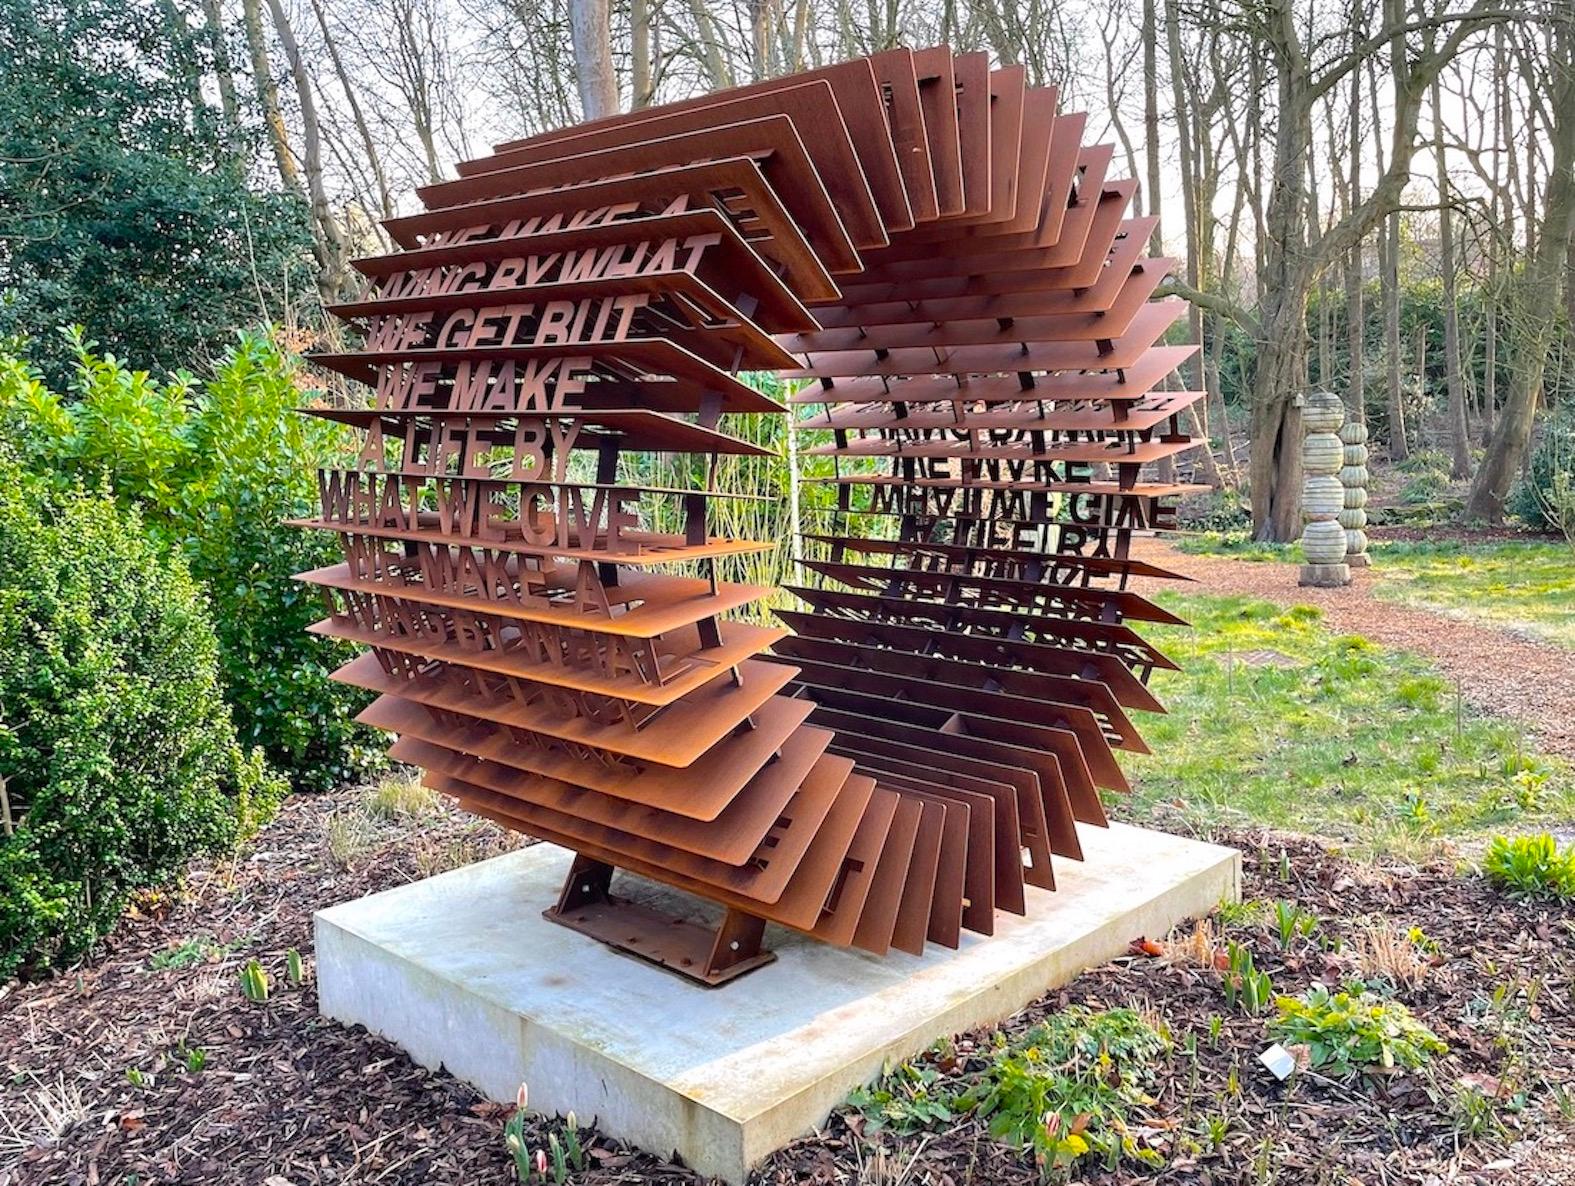 The original Mantra Machine was a joint commission for Yorkshire Sculpture Park and a private collector. The circular Corten steel sculpture represents the seemingly endless cycle of life, while paying homage to the mechanics of the mind. Capturing